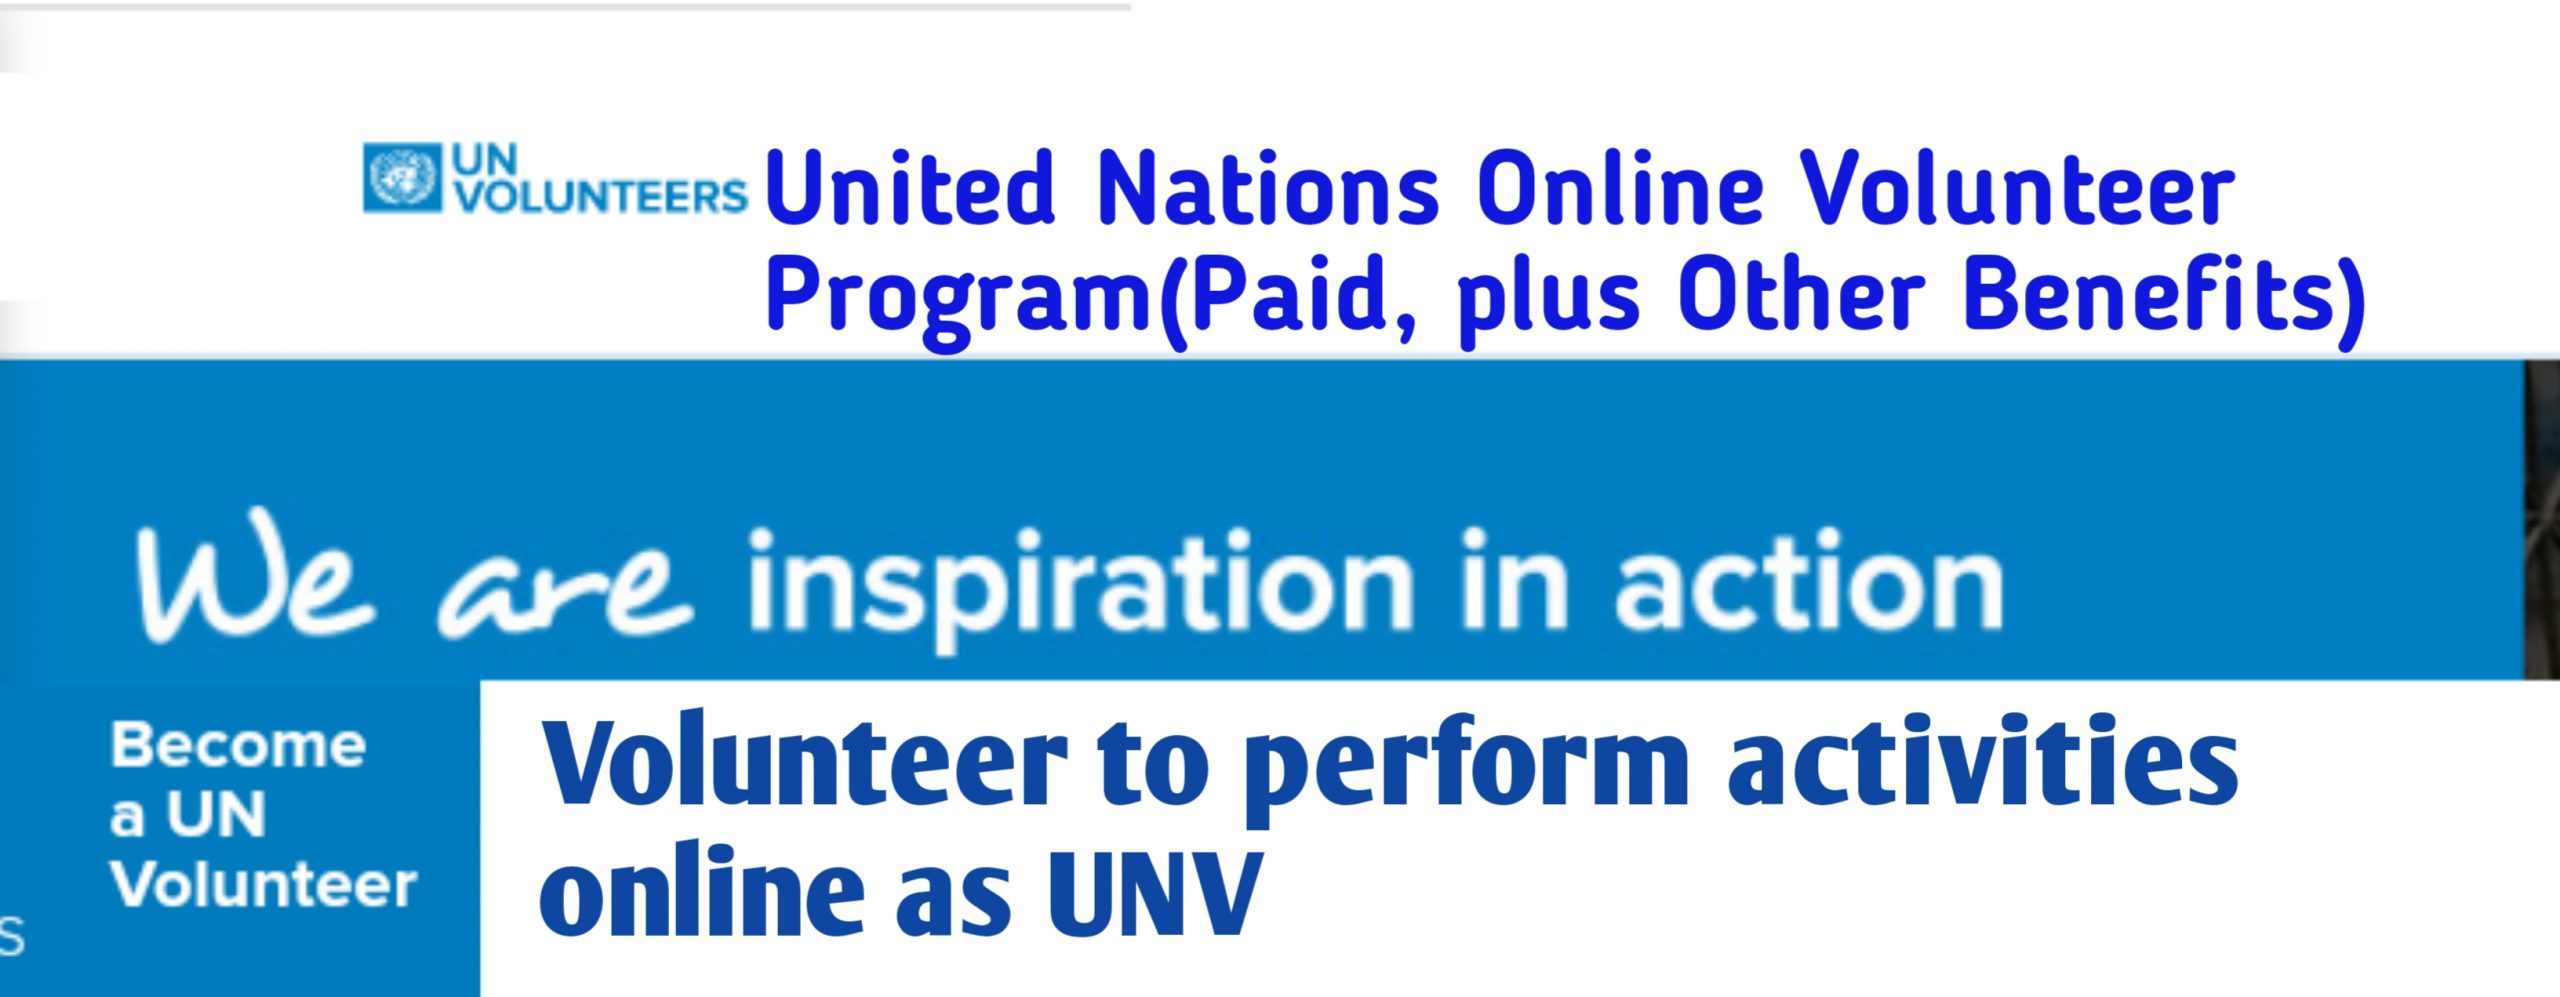 20221022 080528 scaled - United Nations Online Volunteer Programme(Paid, plus Other Benefits)